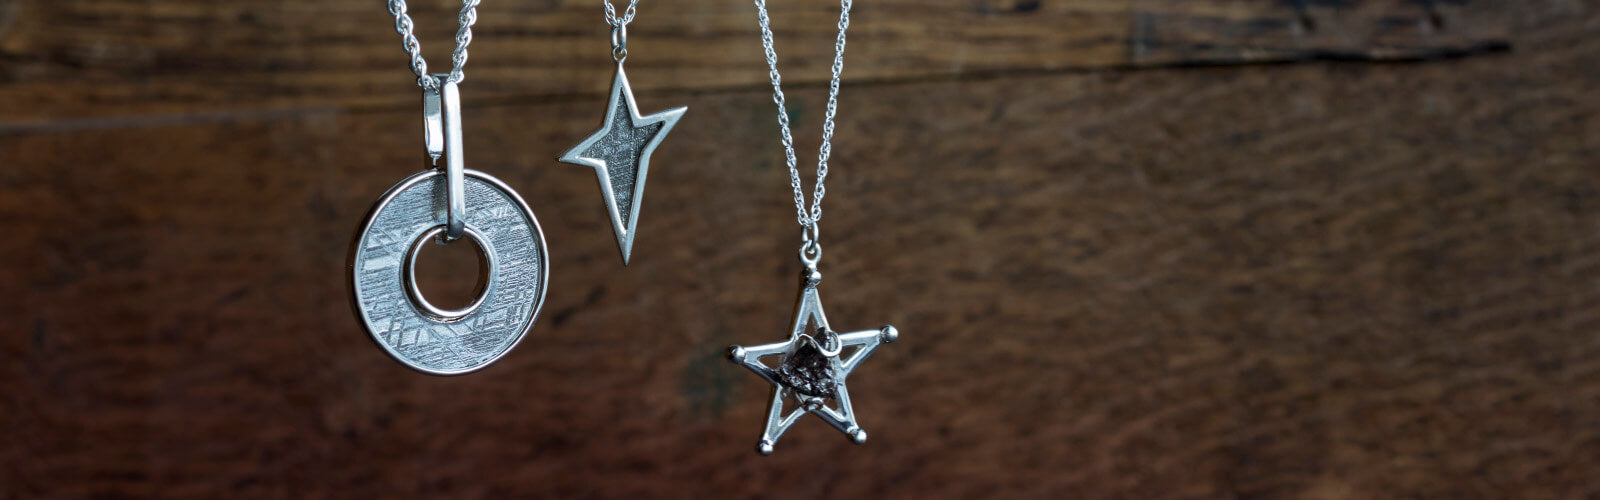 Jewelry by Johan Meteorite Necklaces